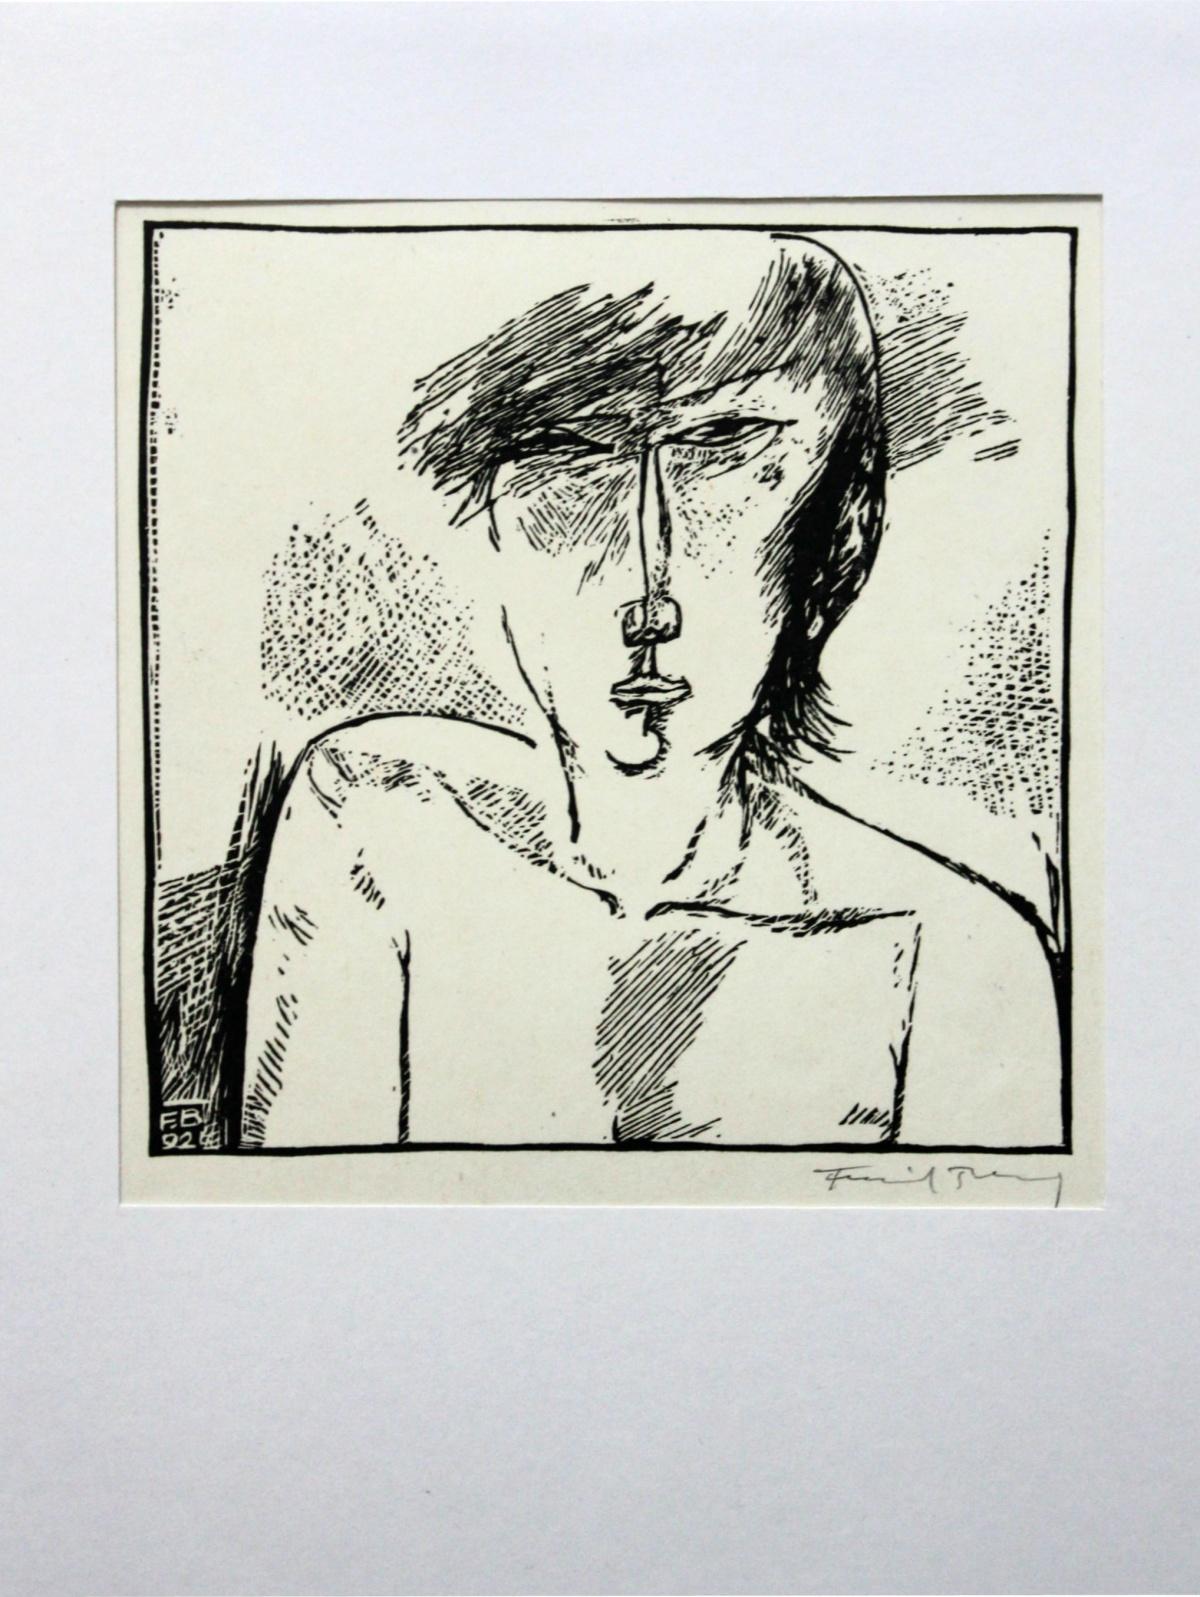 B's portrait - XXI century, Black and white etching - Painting by Franciszek Bunsch